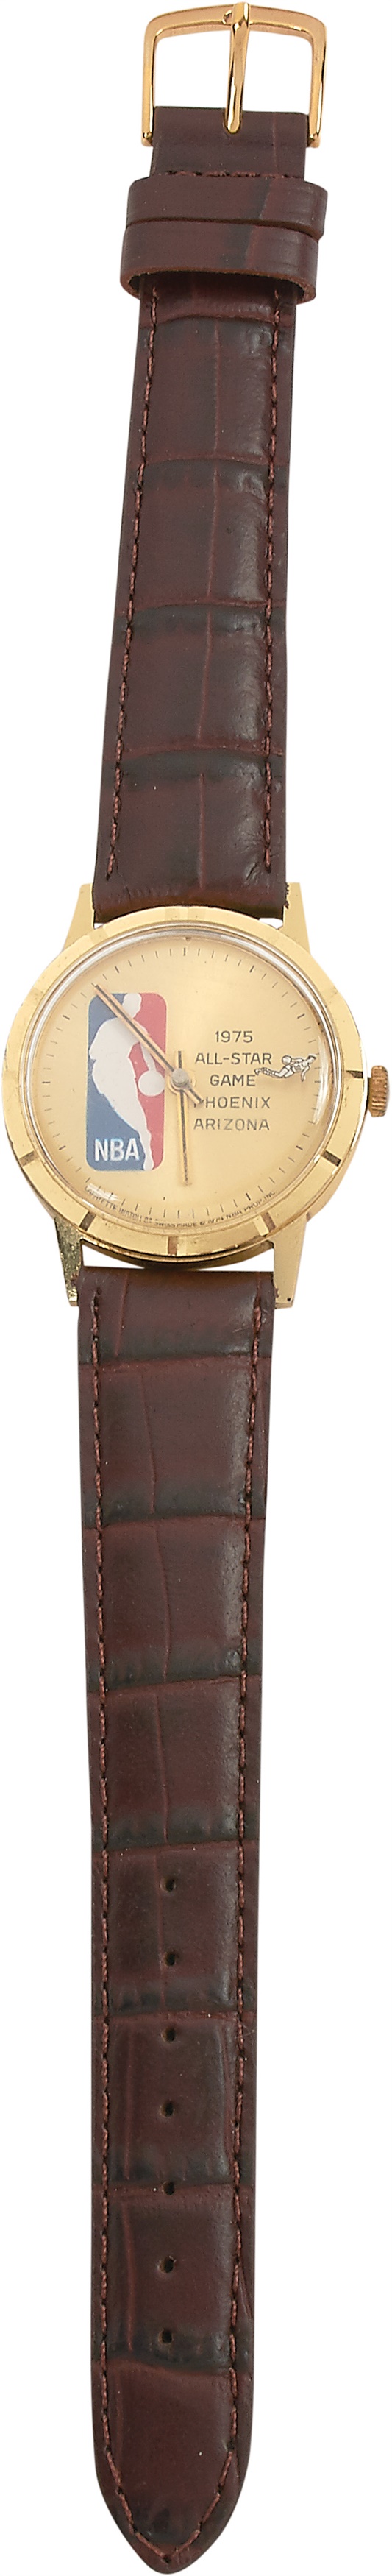 Basketball - Steve Mix 1975 All-Star Game Watch with His Letter